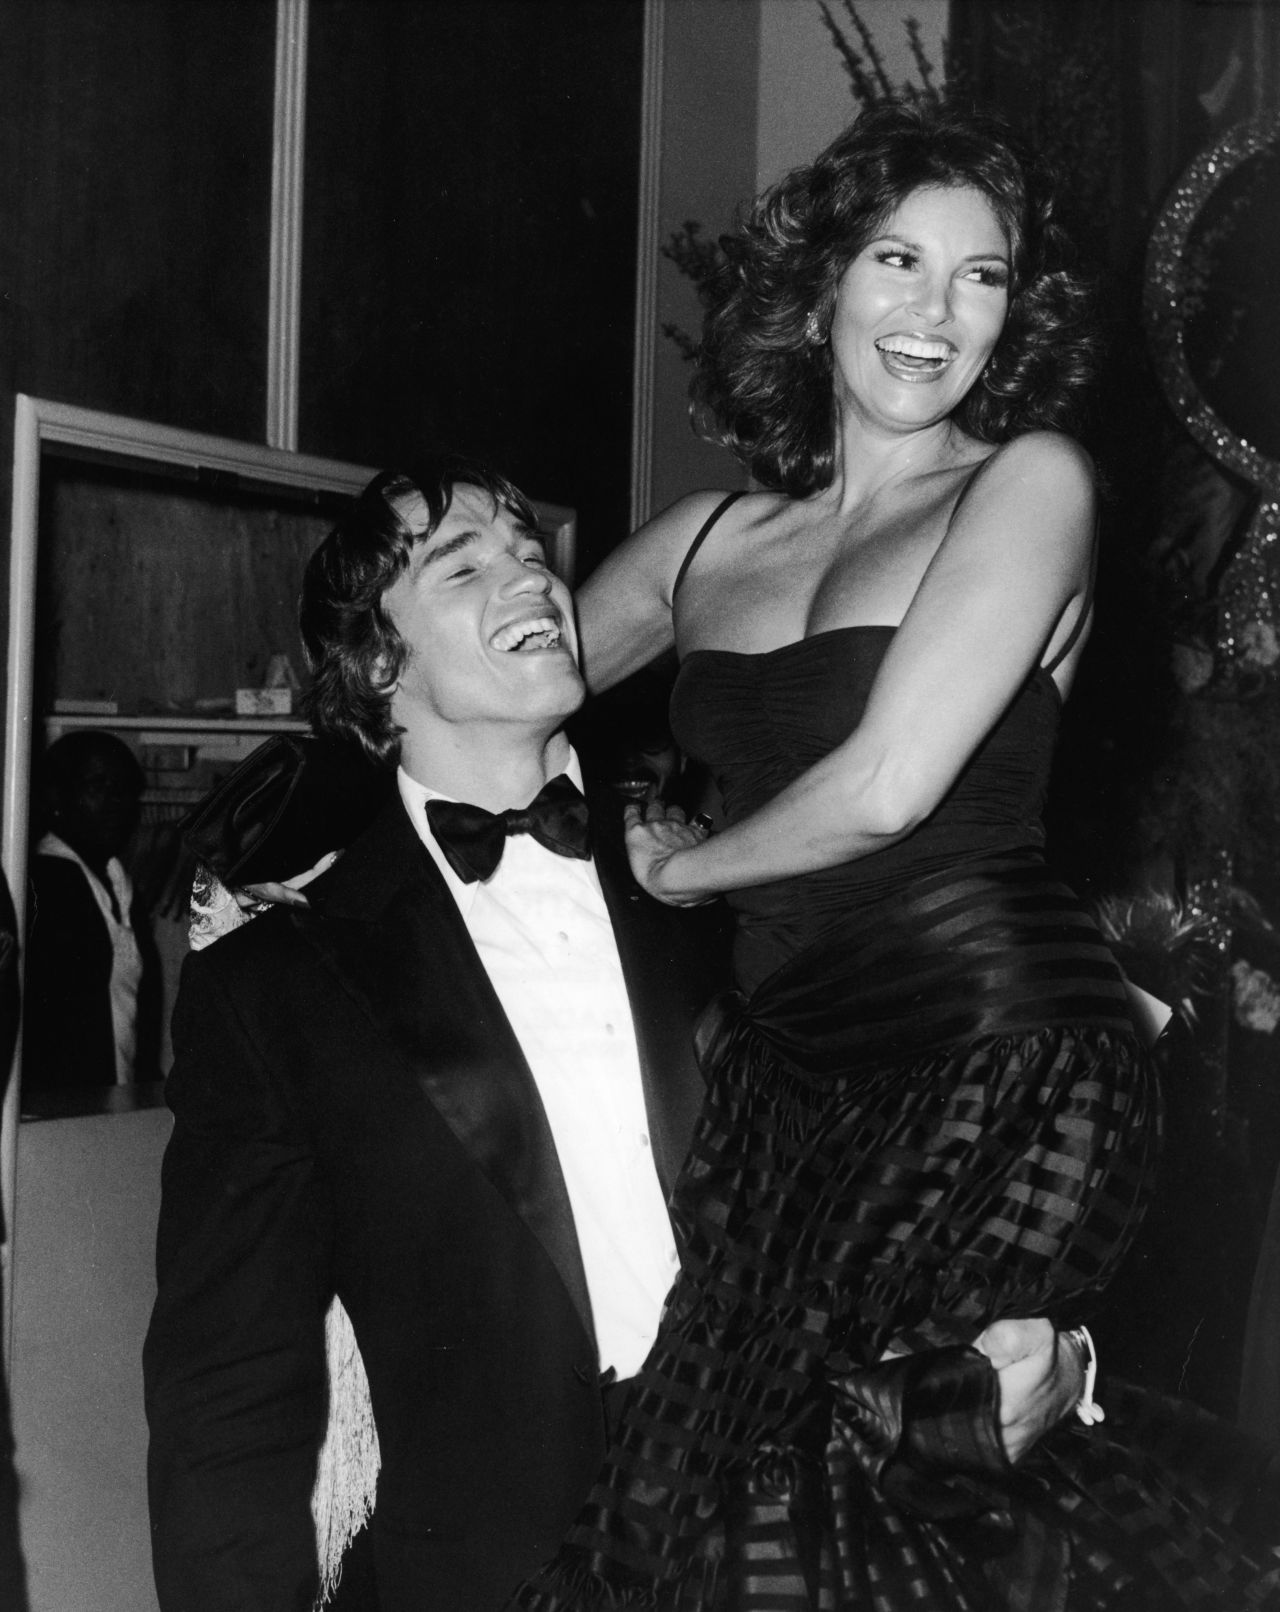 Arnold Schwarzenegger holds up Welch at the Golden Globe Awards in 1977.